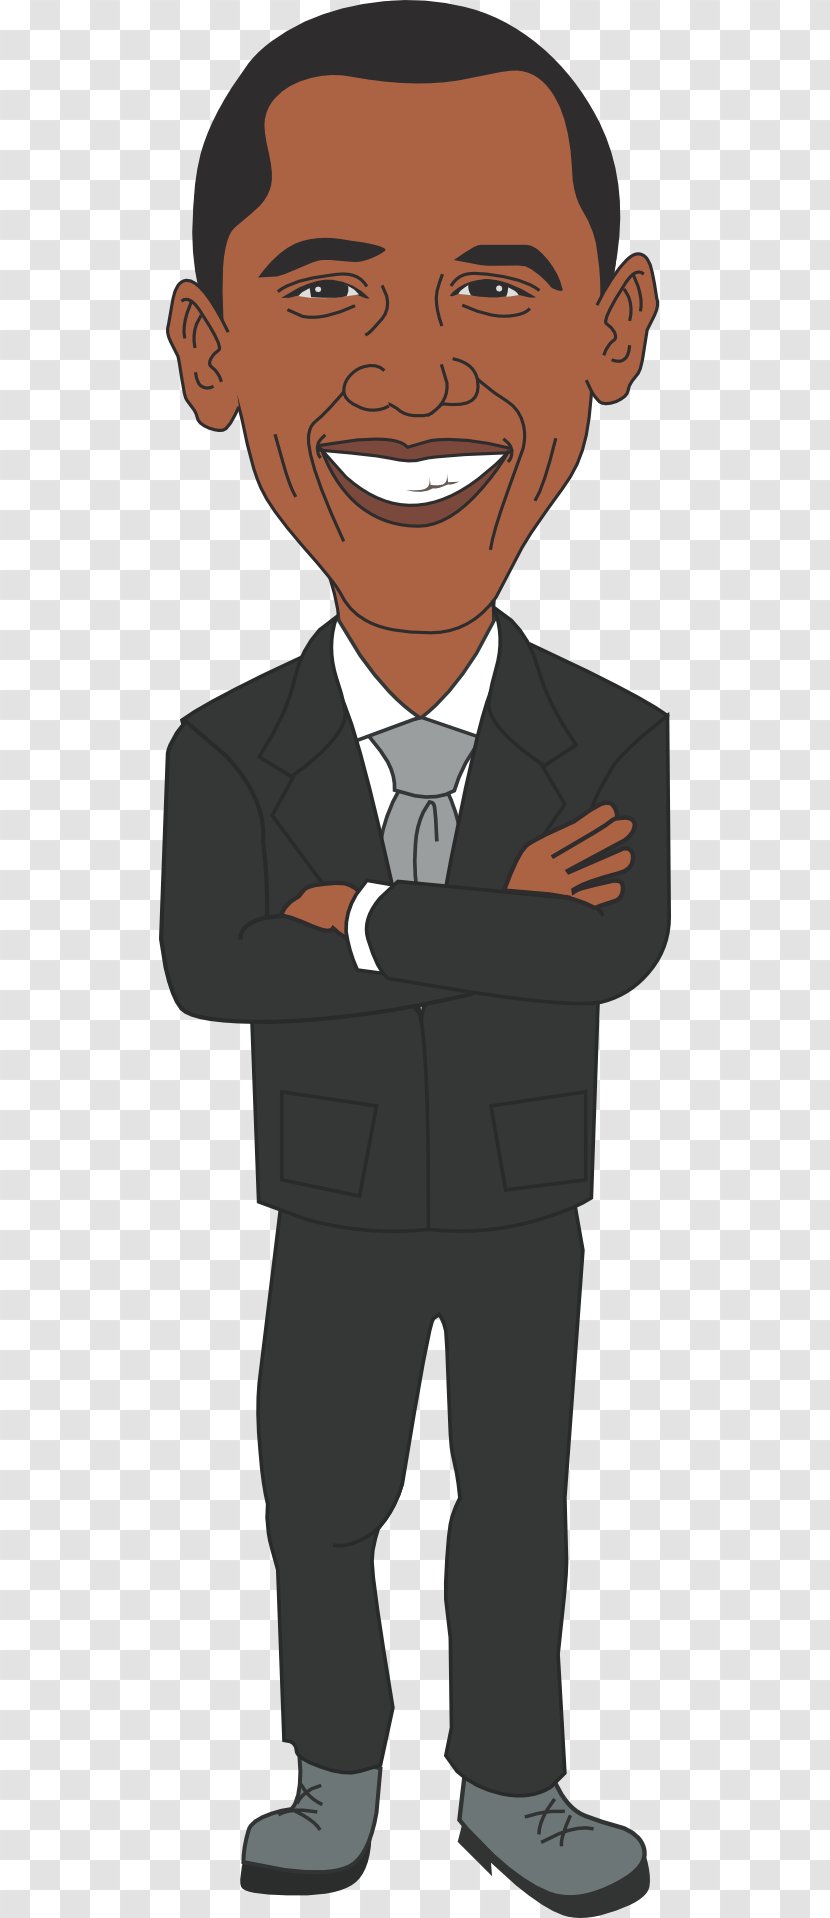 Barack Obama President Of The United States Clip Art - Professional - Cliparts Transparent PNG